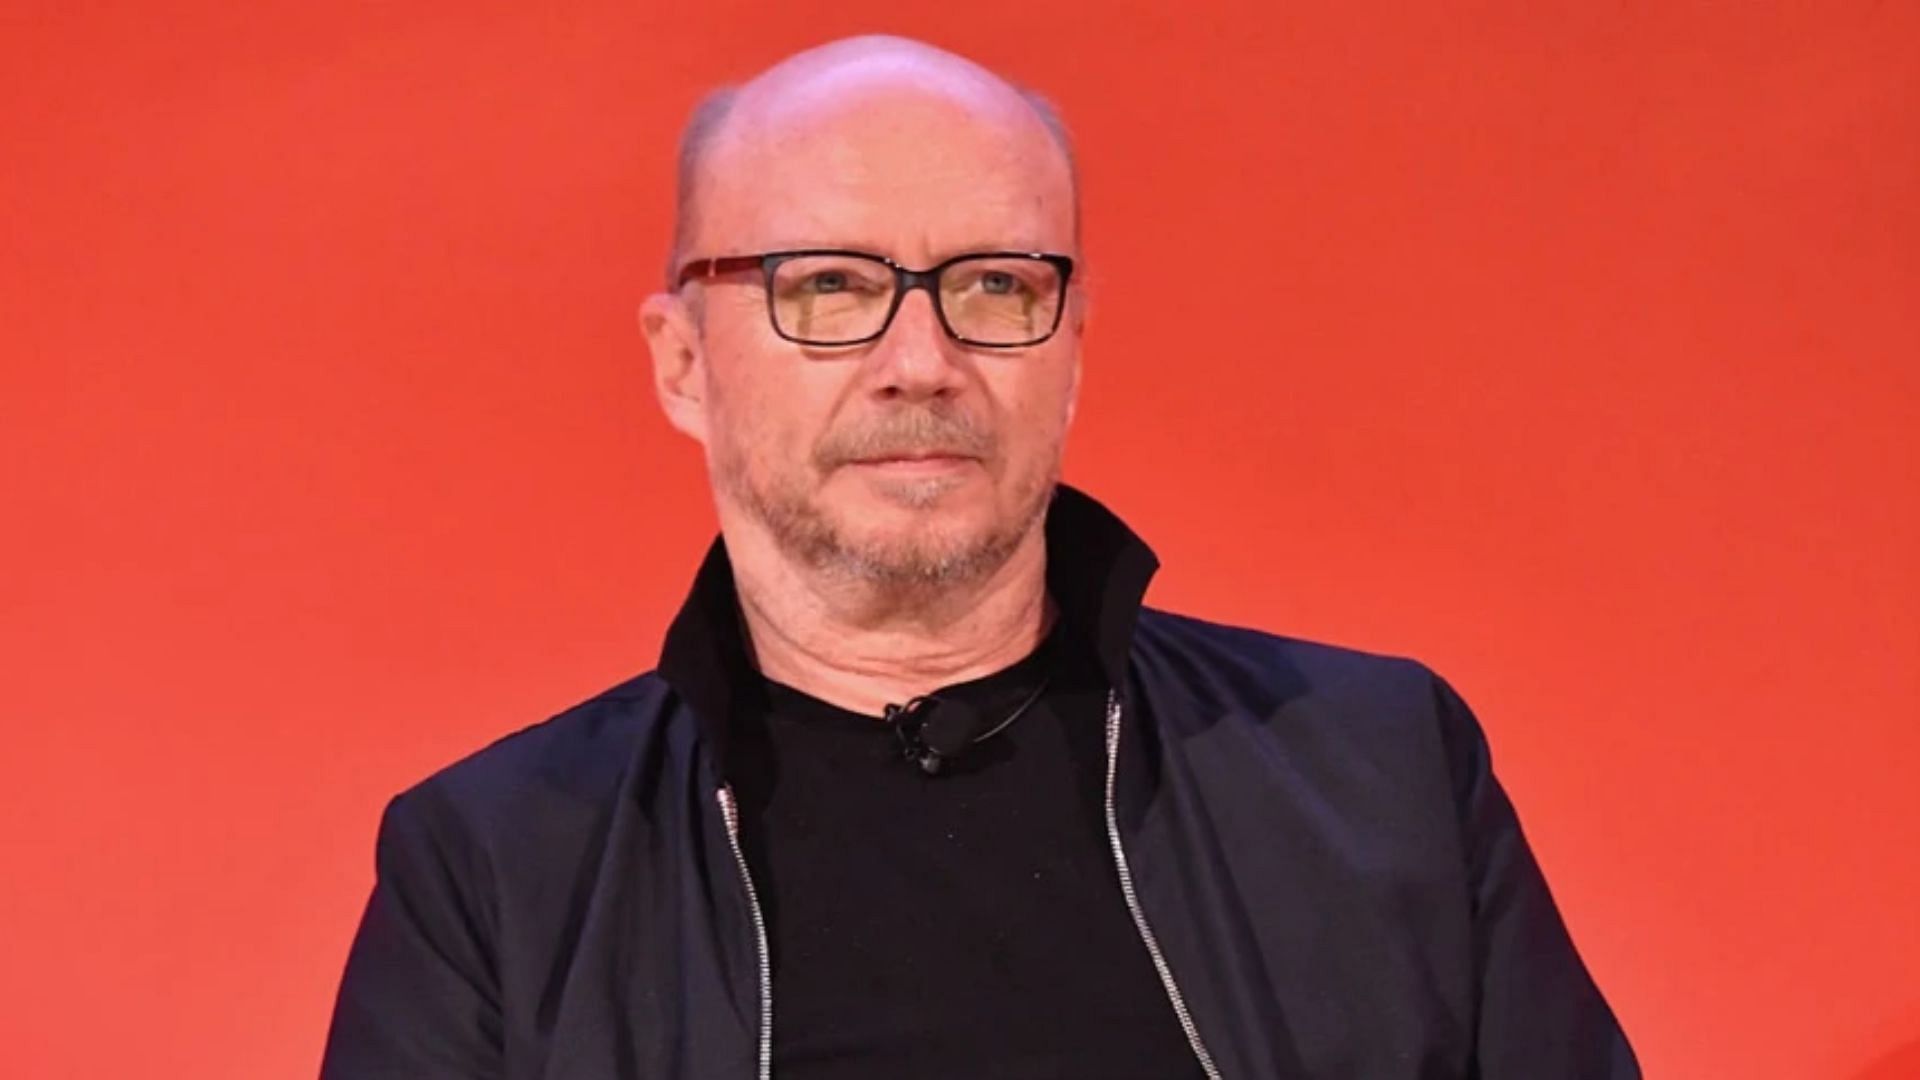 Paul Haggis has stayed in Italy during the house arrest. (Image via Slaven Vlasic/Getty Images)